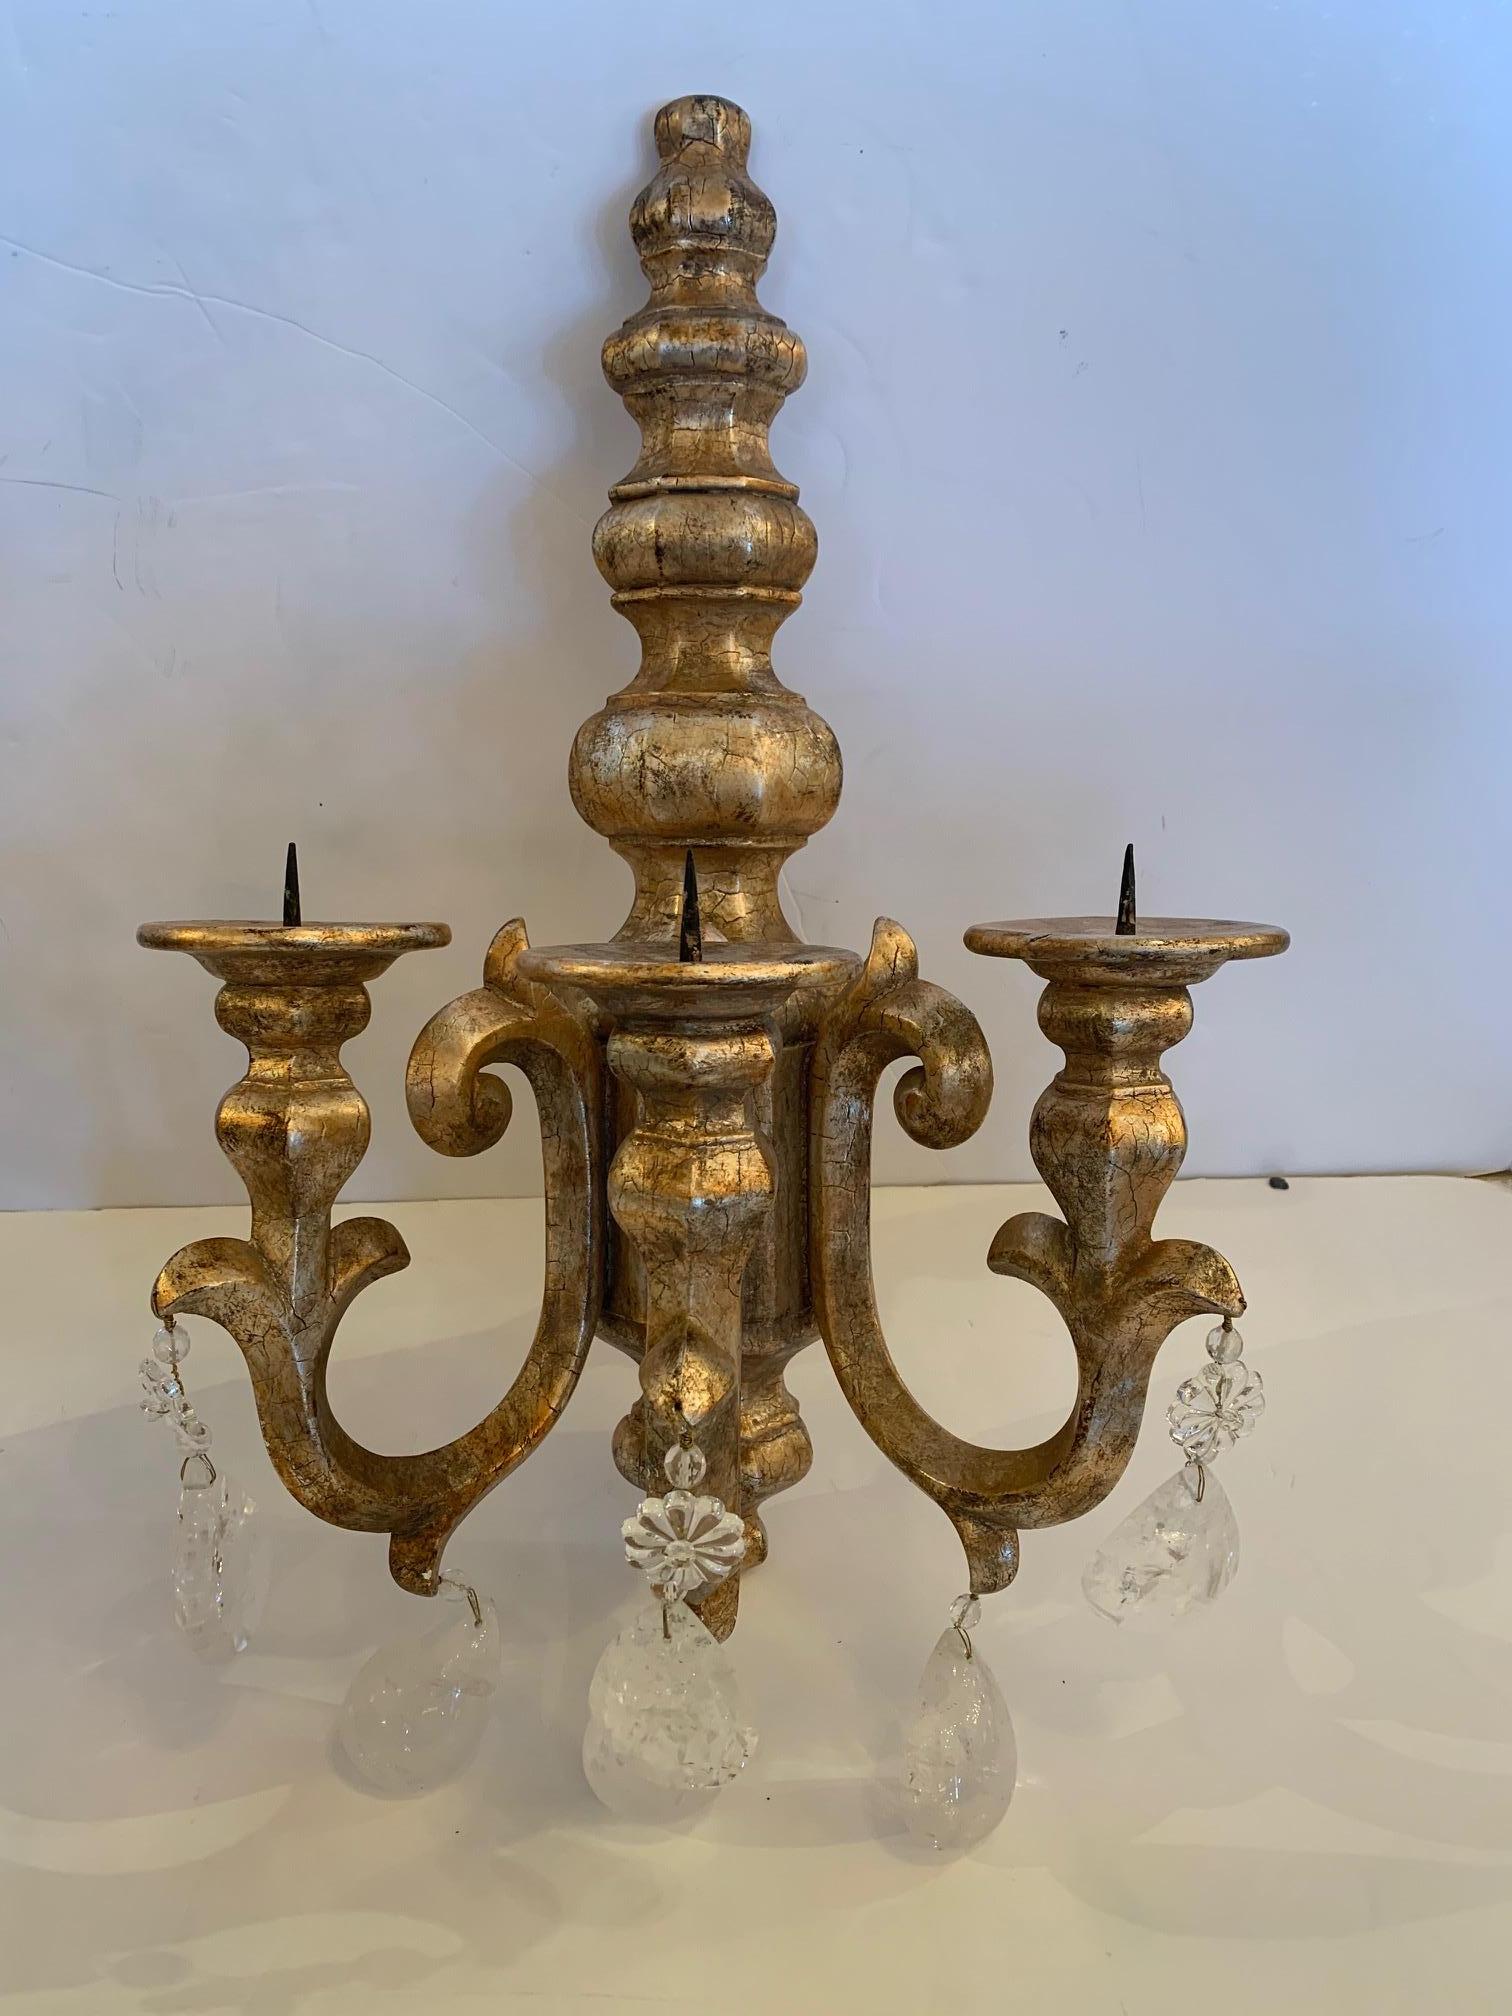 Impressive glamorous pair of chunky giltwood candle sconces dripping with large rock crystals.
Matching grand chandelier is also available. Both are from a top East Coast designers personal collection.
No markings but designer believes maker is